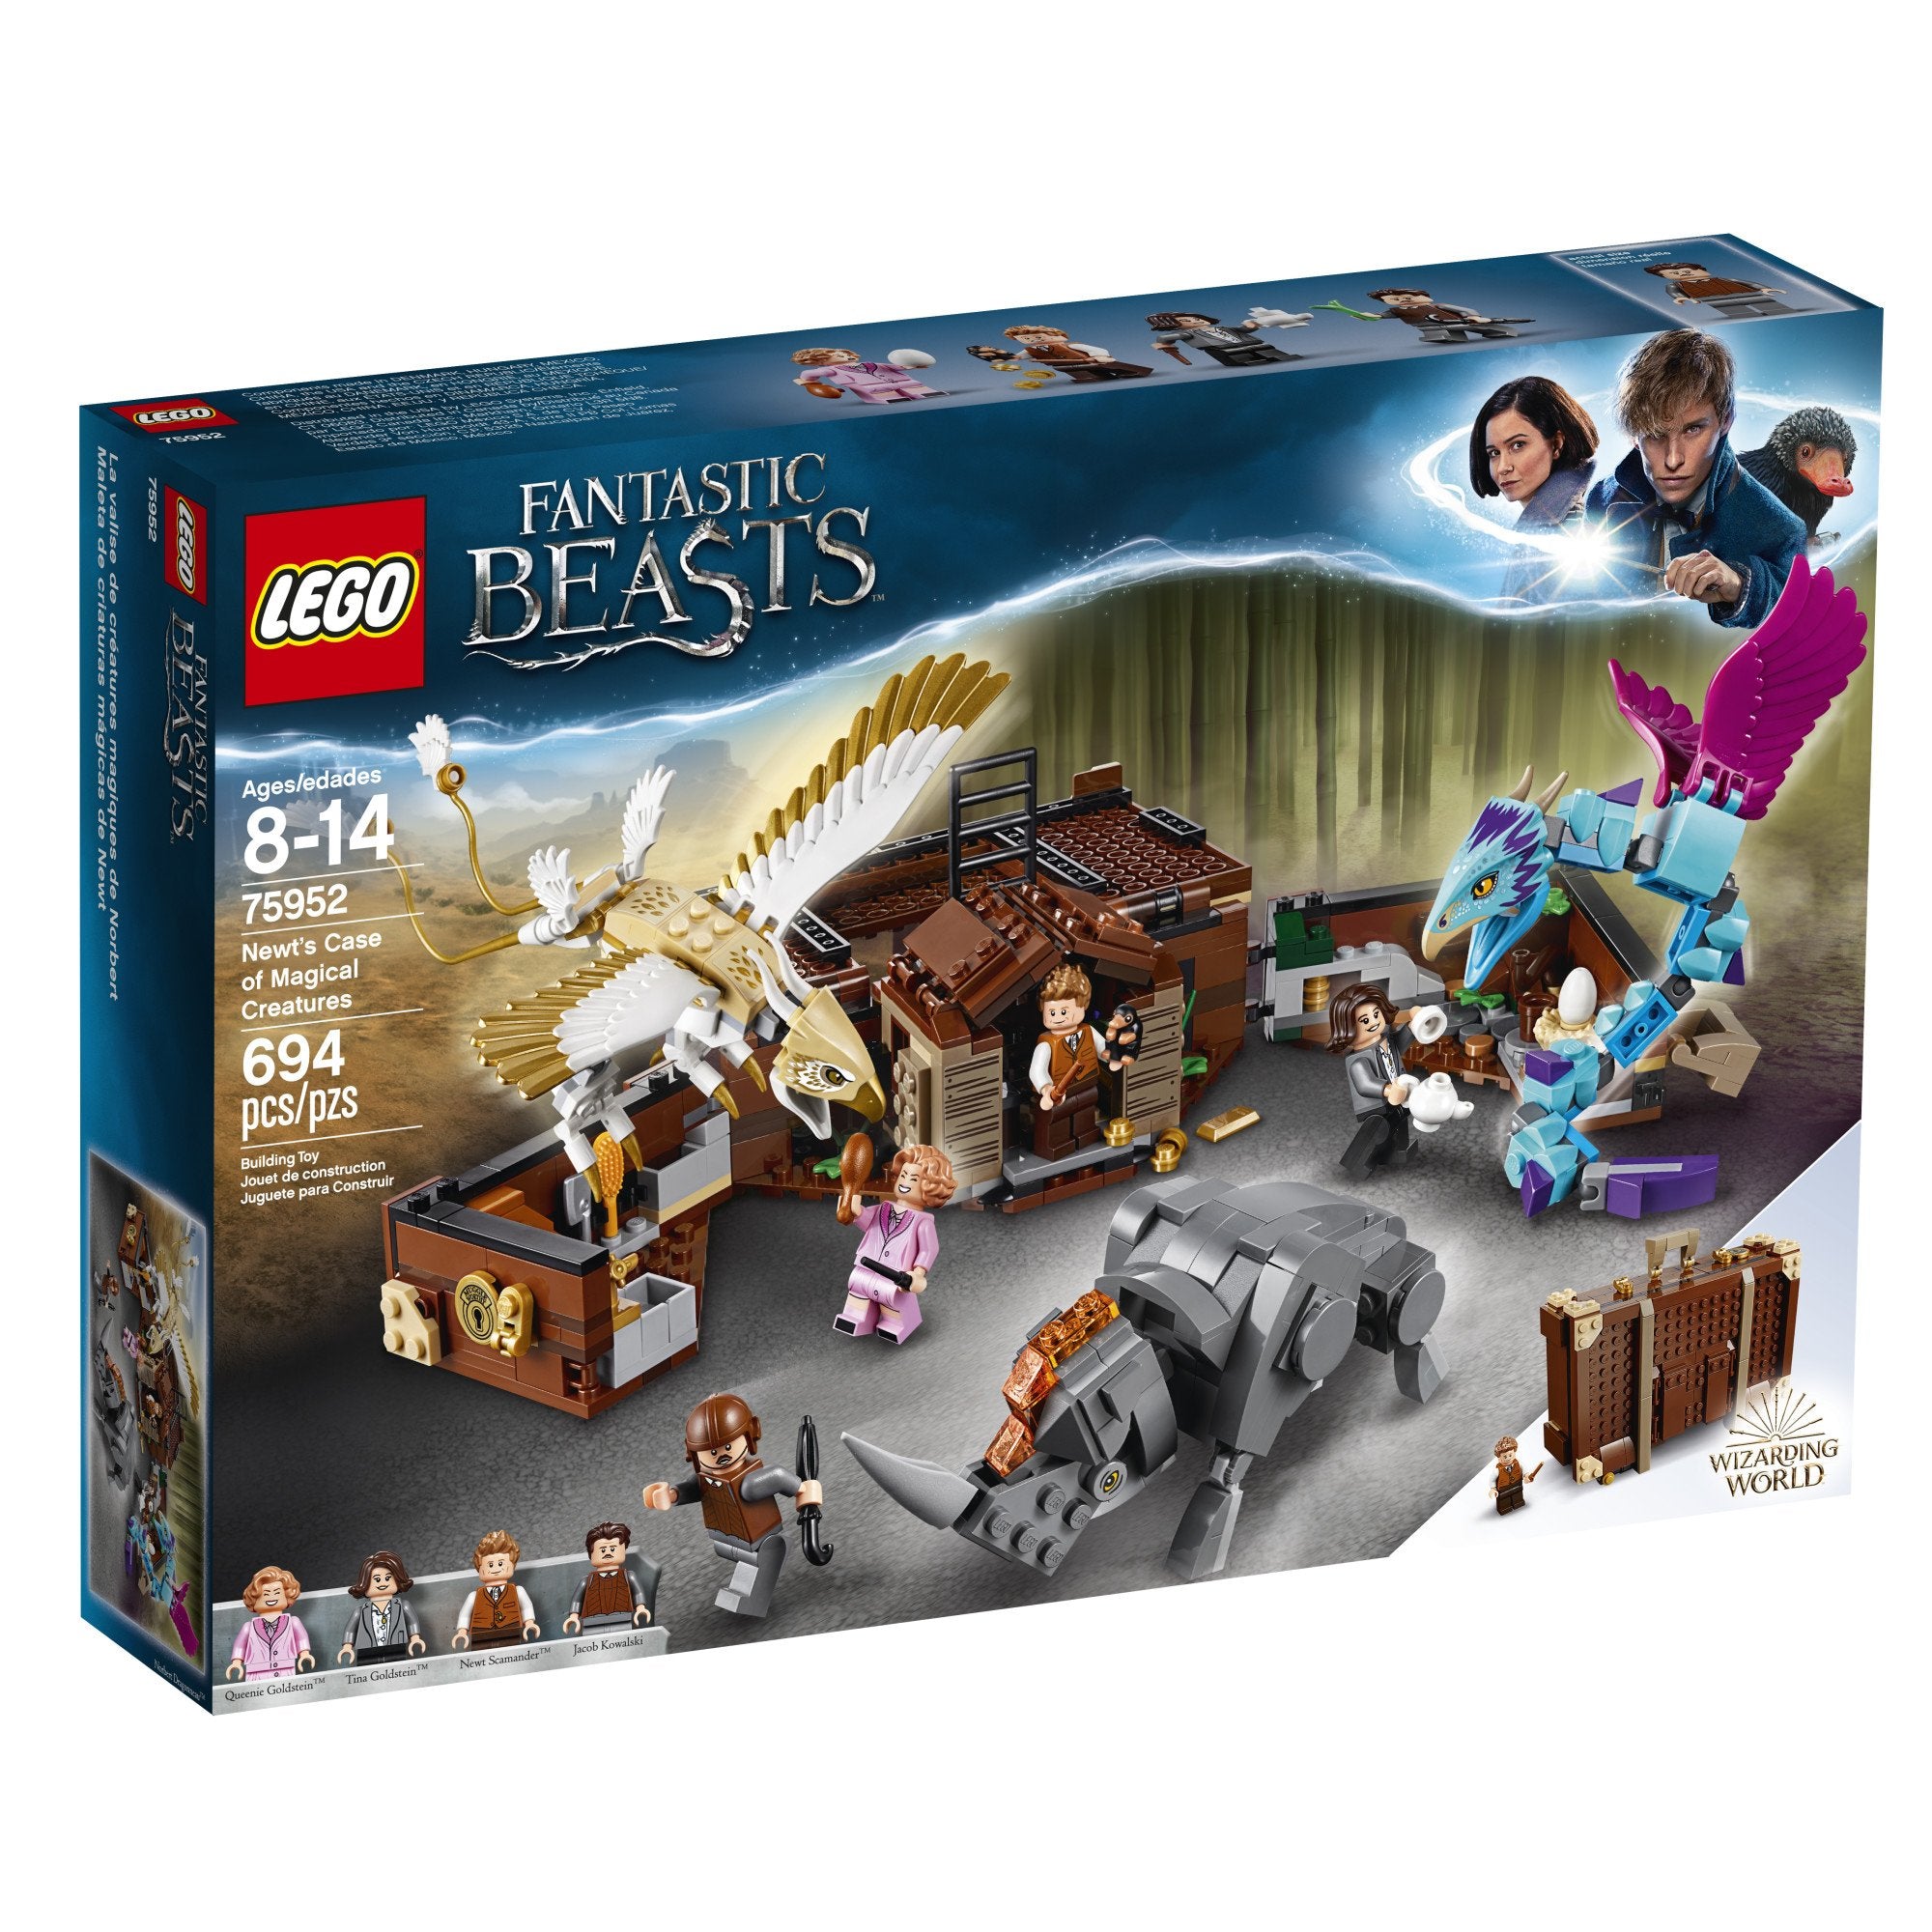 LEGO Harry Potter Newts Case of Magical Creatures Building Kit 75952 (694 Piece), Multicolor (Like New, Open Box)